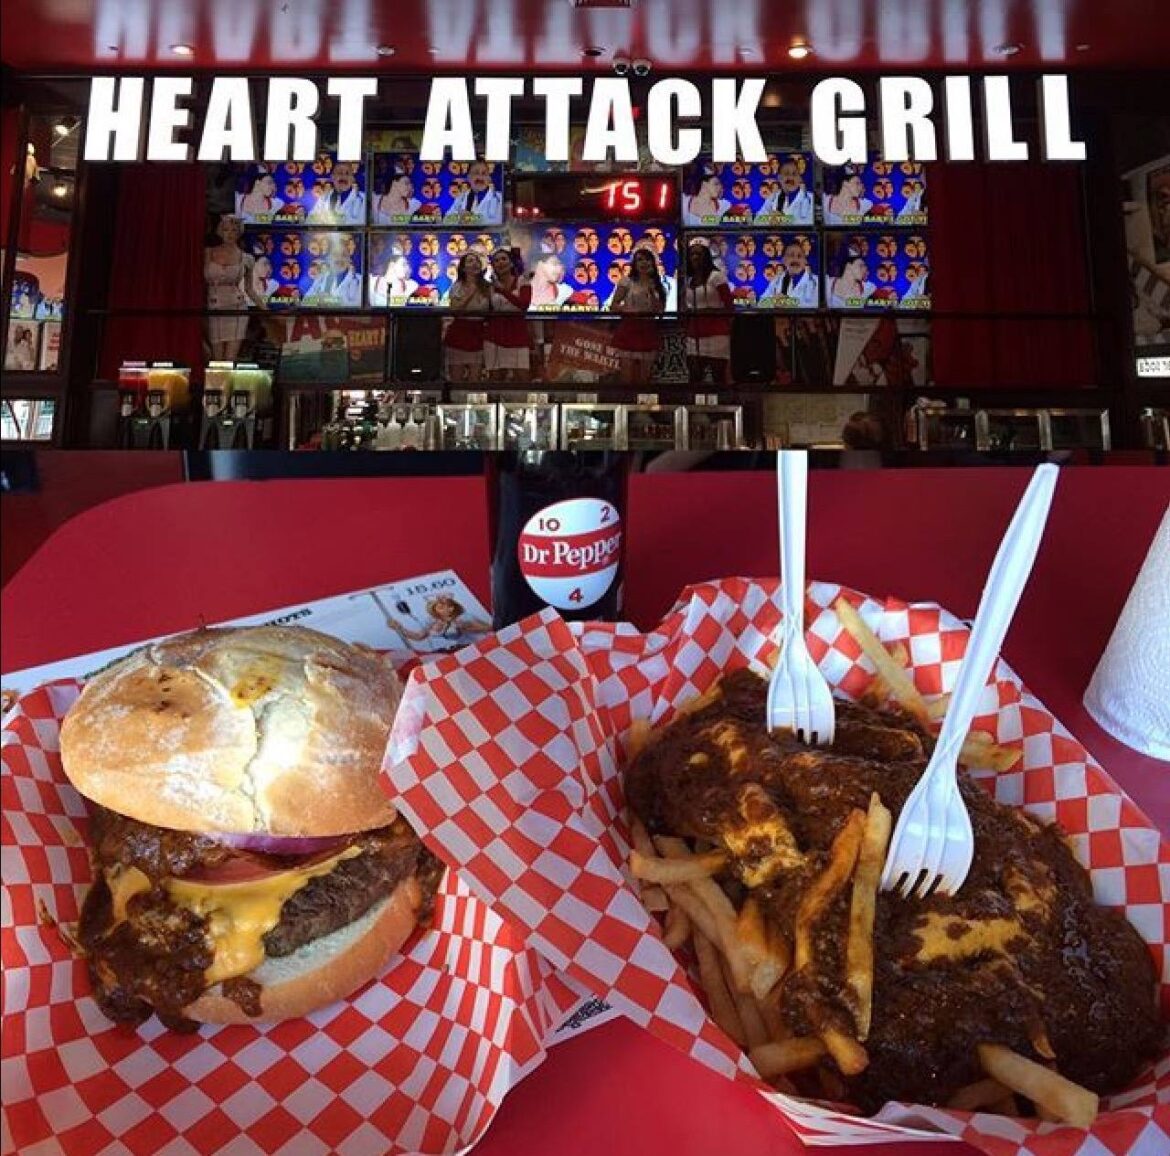 What if Heart Attack Grill came to Malta? - Veggy Malta